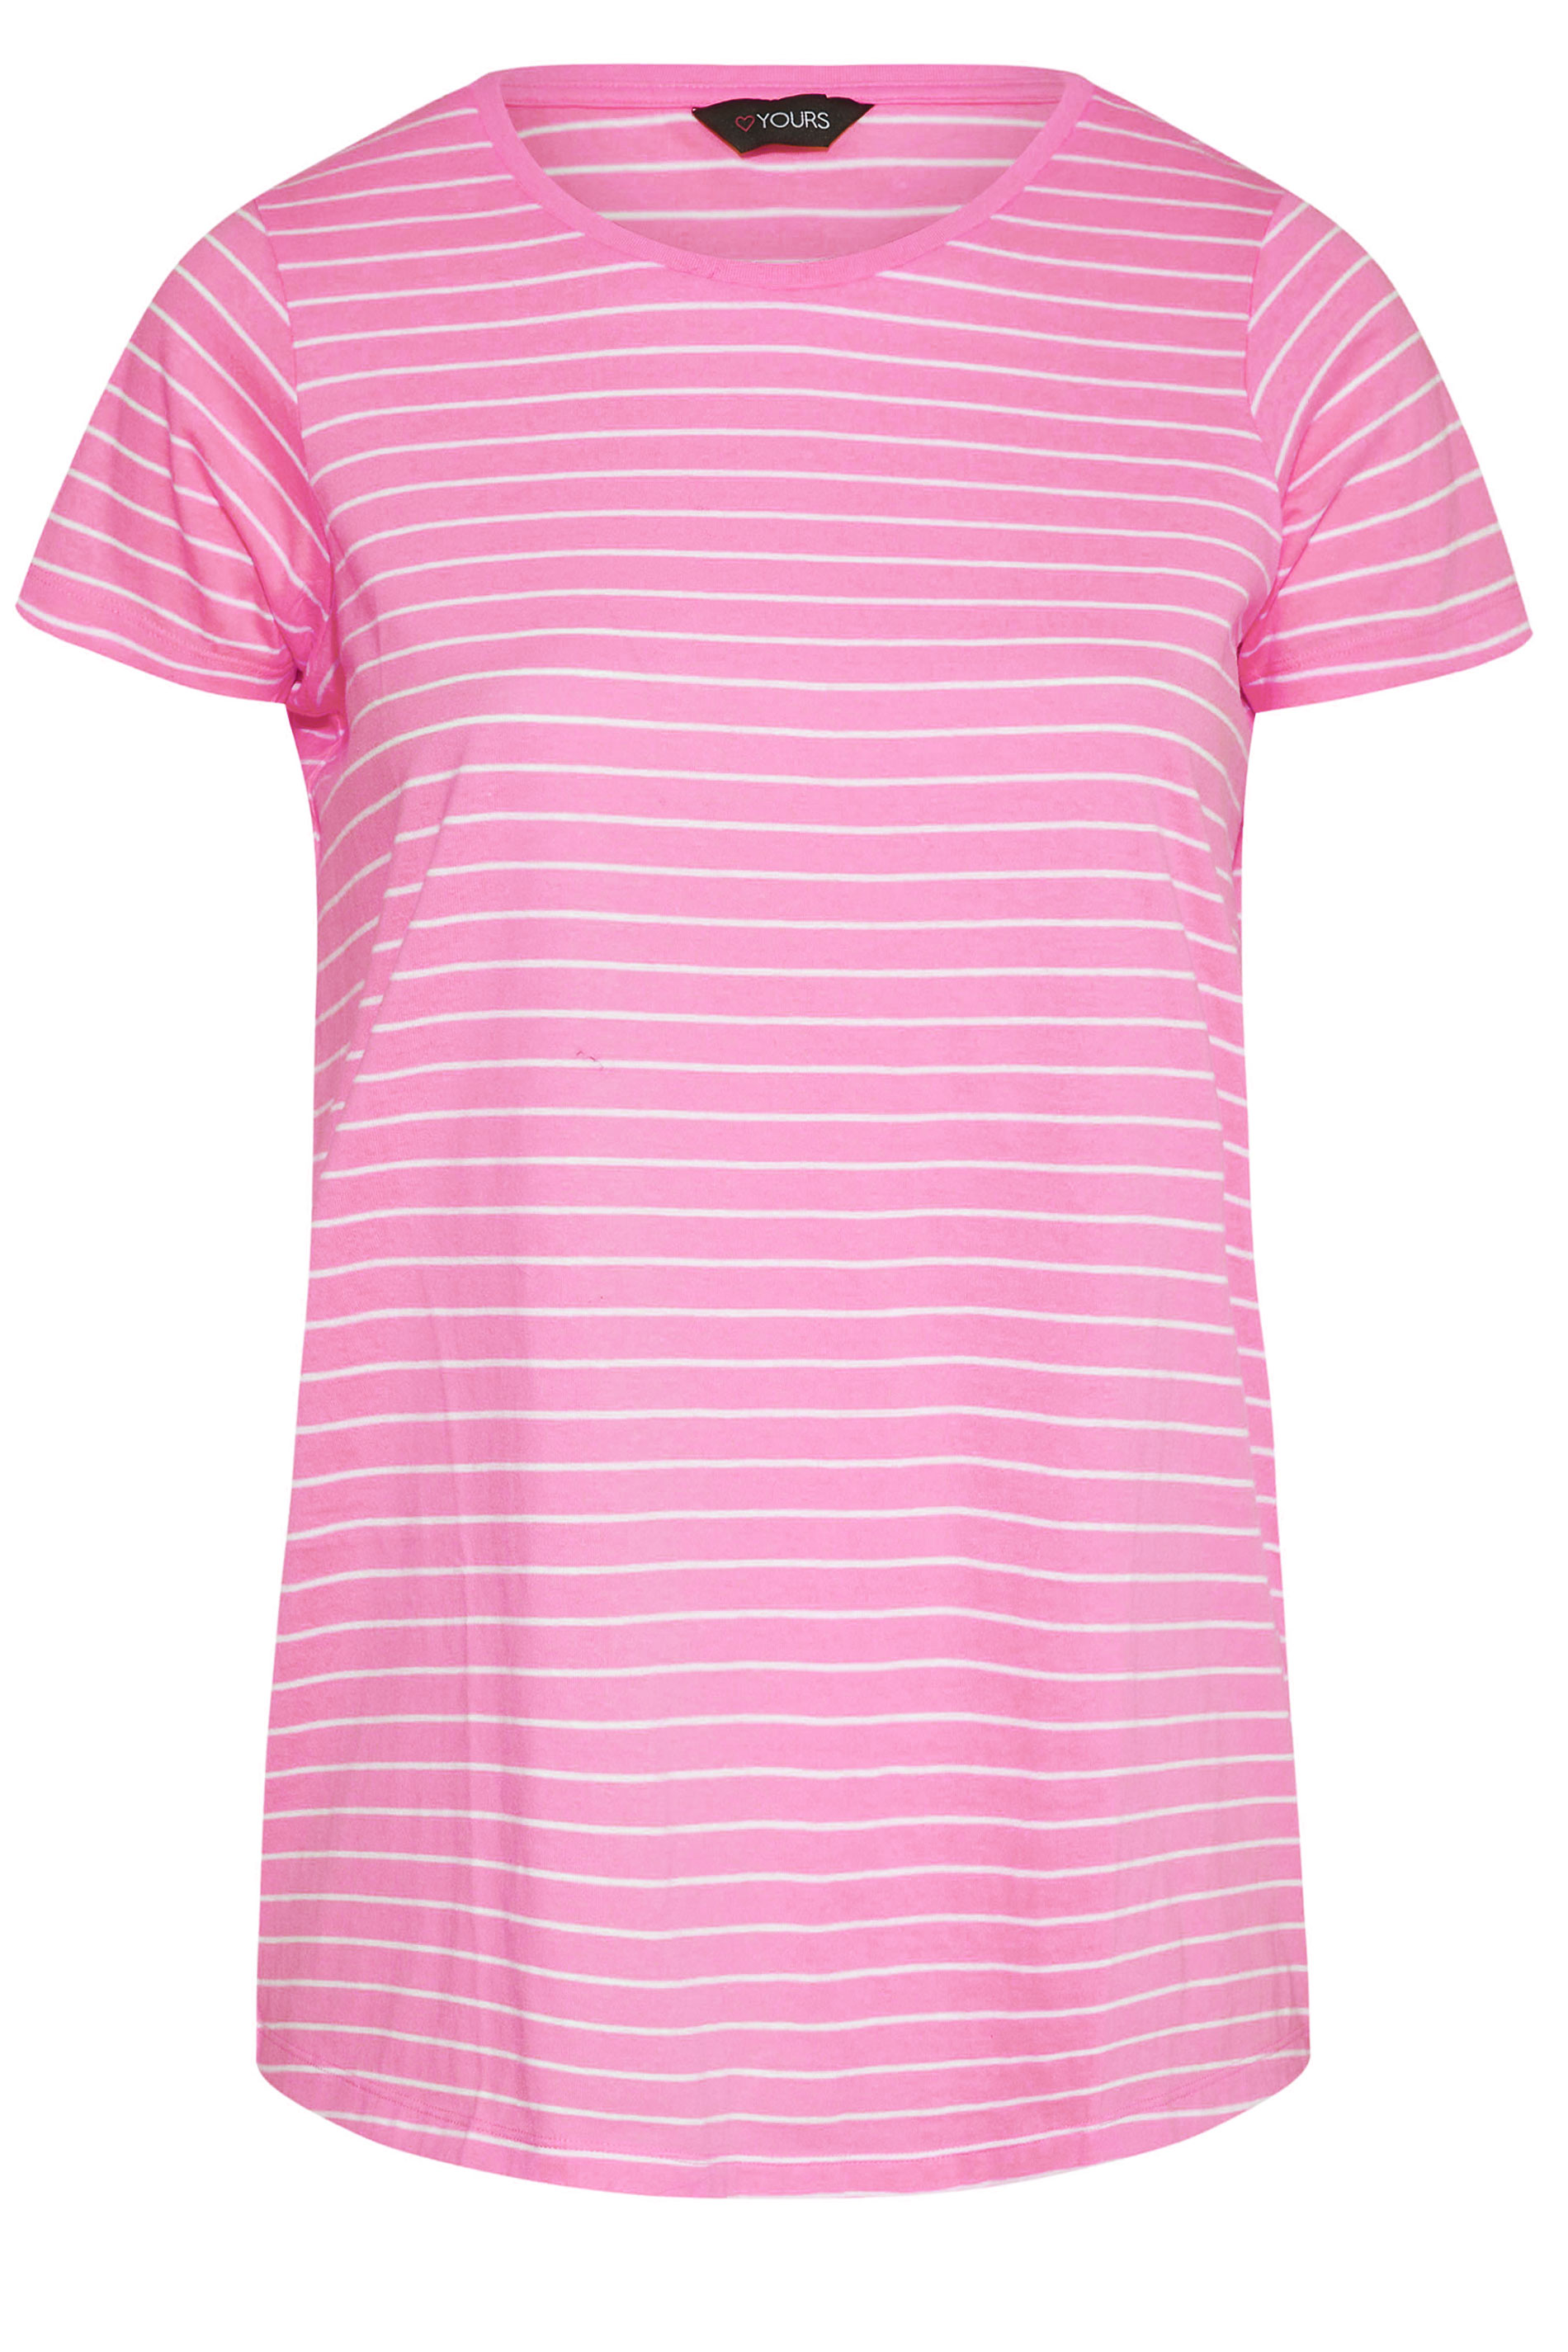 Grande taille  Tops Grande taille  T-Shirts | T-Shirt Rose Fines Rayures - HA62184